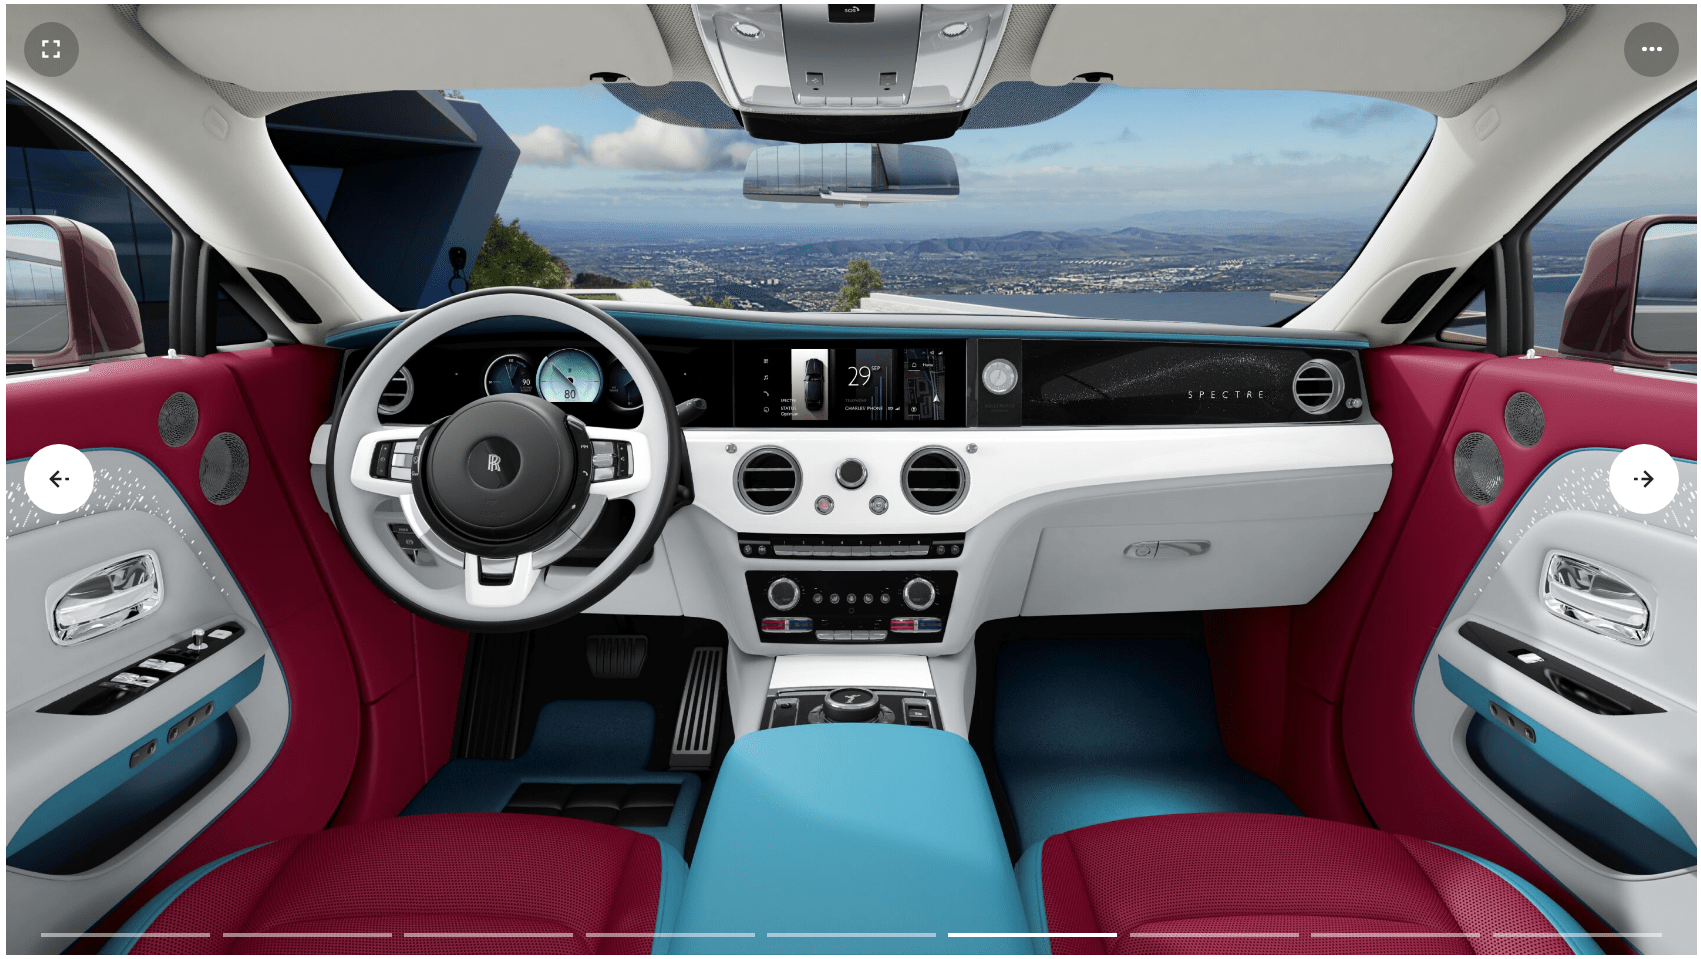 Everything You Can Customise in the Rolls-Royce Spectre Configurator